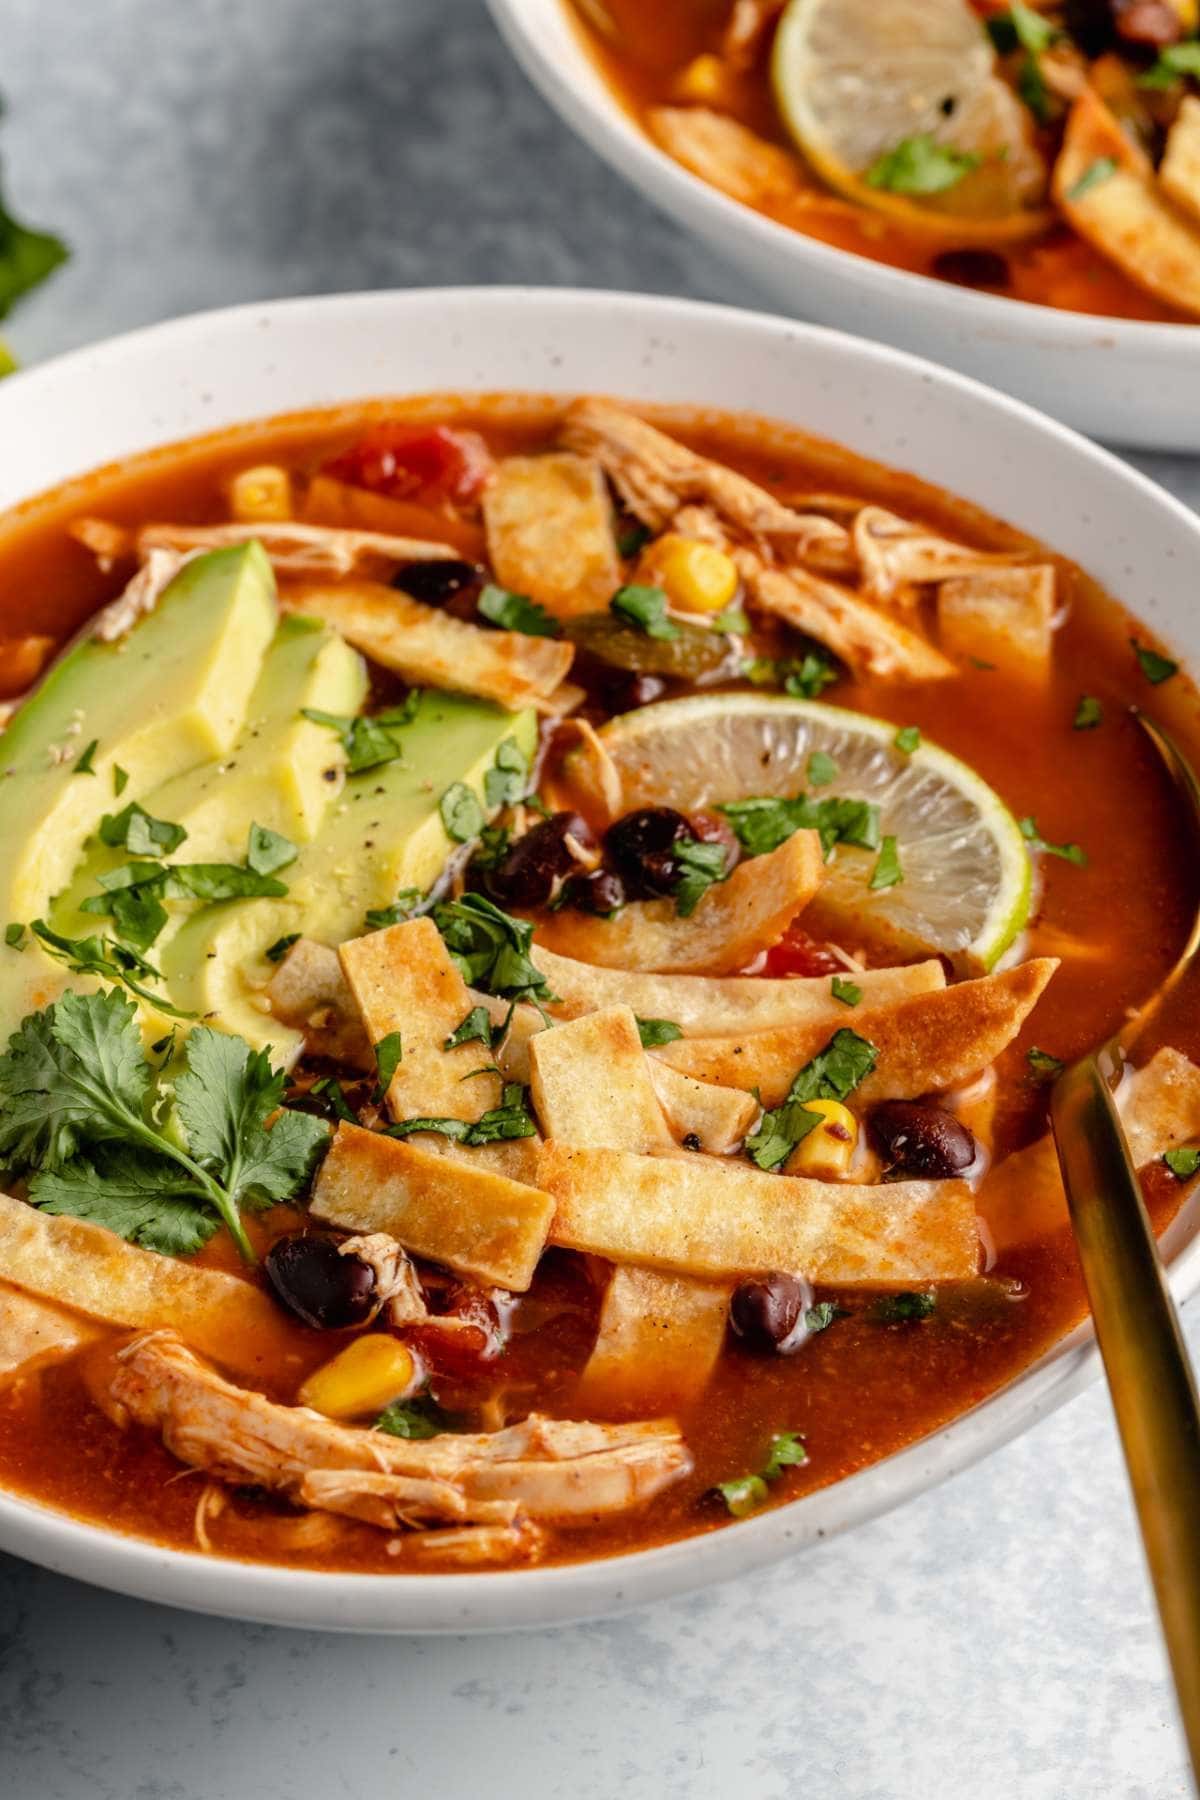 Bowl of homemade Crockpot Chicken Tortilla Soup garnished with sliced avocado,  lemon and cilantro